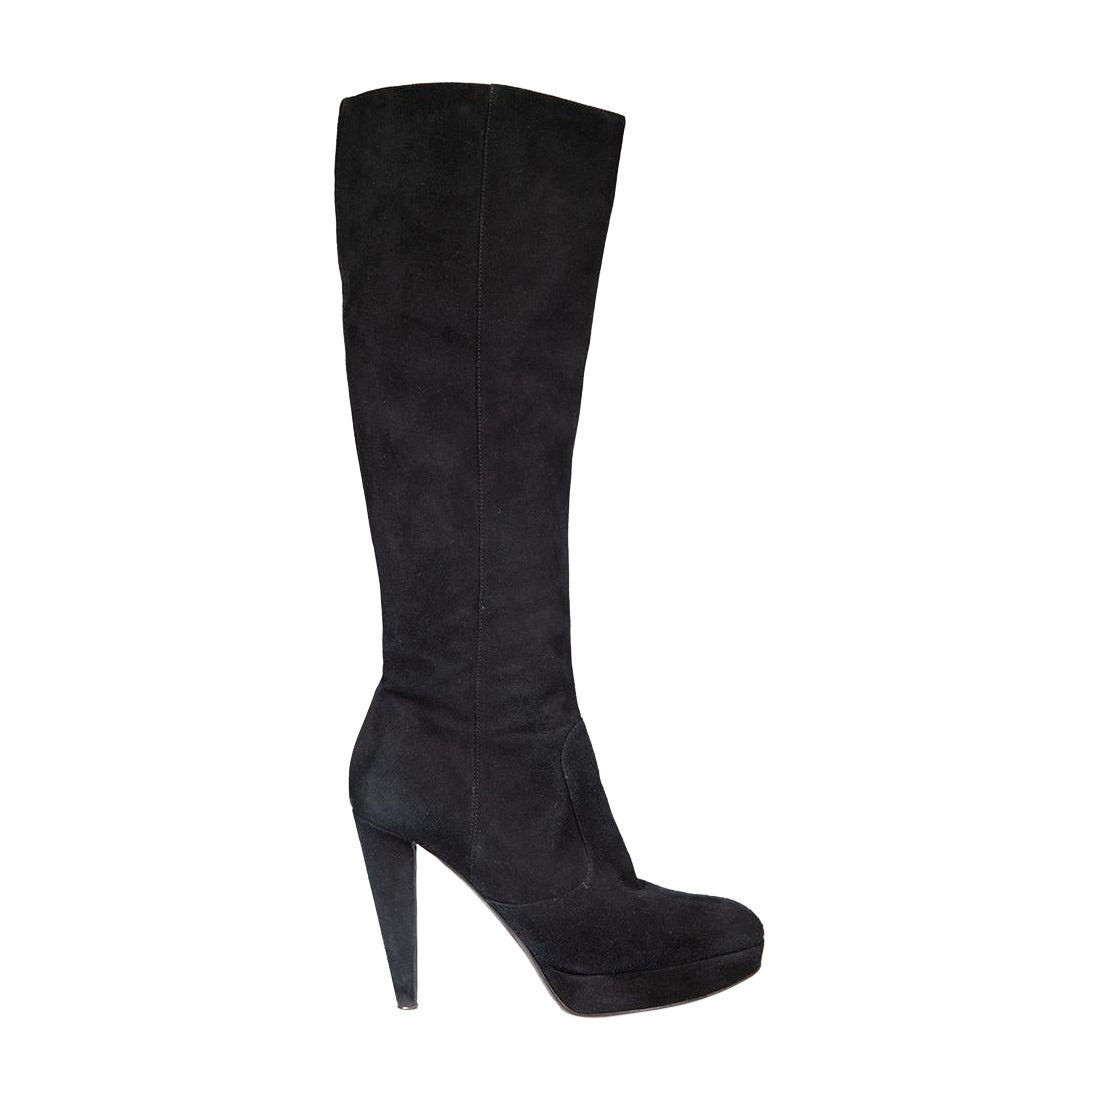 Sergio Rossi Black Suede Knee High Heeled Boots Size IT 38 For Sale